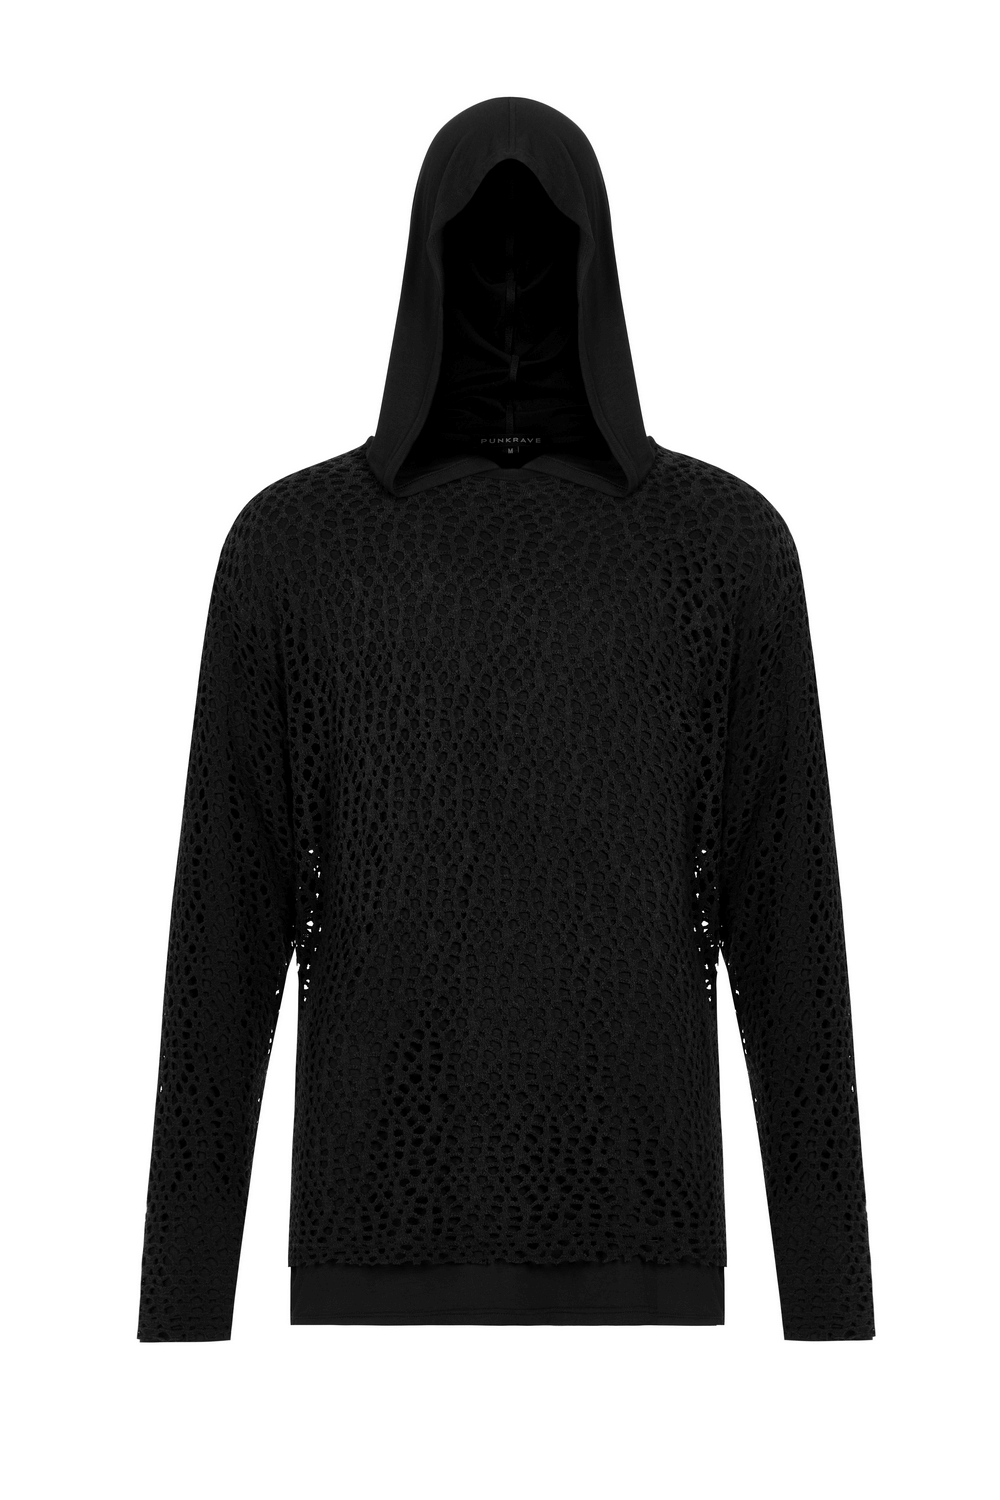 Chic Gothic Loose Male Hoodie with Mesh Overlay - HARD'N'HEAVY